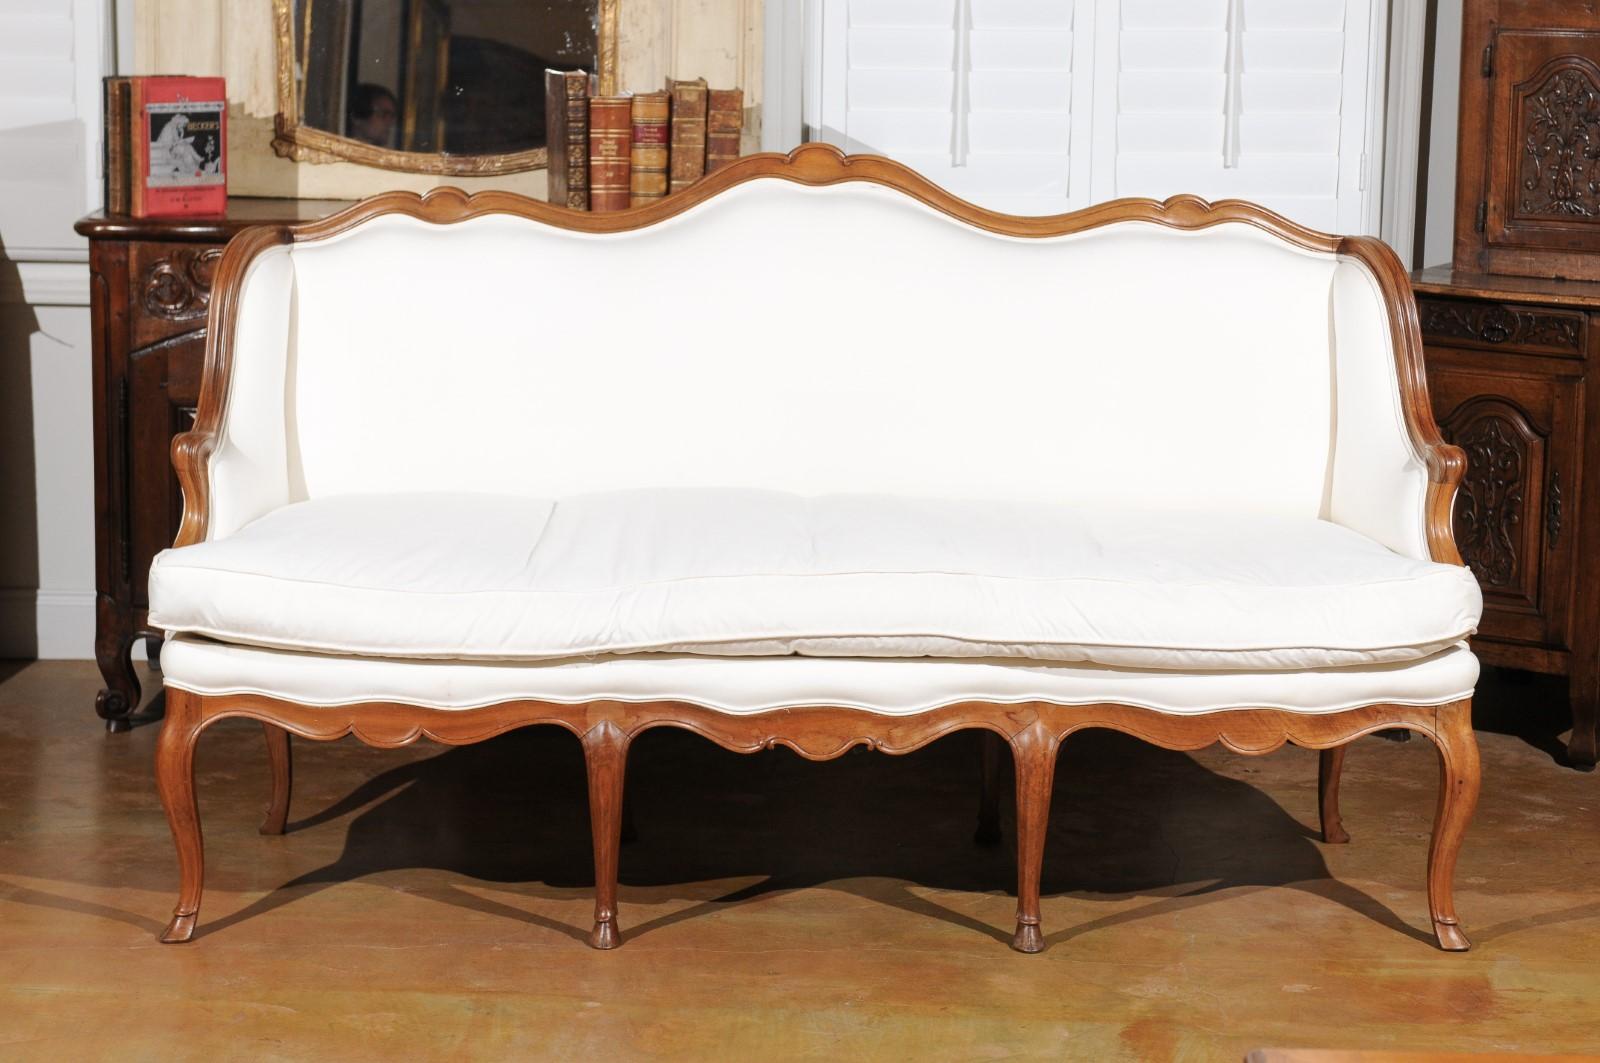 A French Louis XV style walnut sofa from the 19th century, with scrolled crest, cabriole legs and new upholstery. Born in France during the politically dynamic 19th century, this three-seat canapé features a straight back with scrolling upper rail,